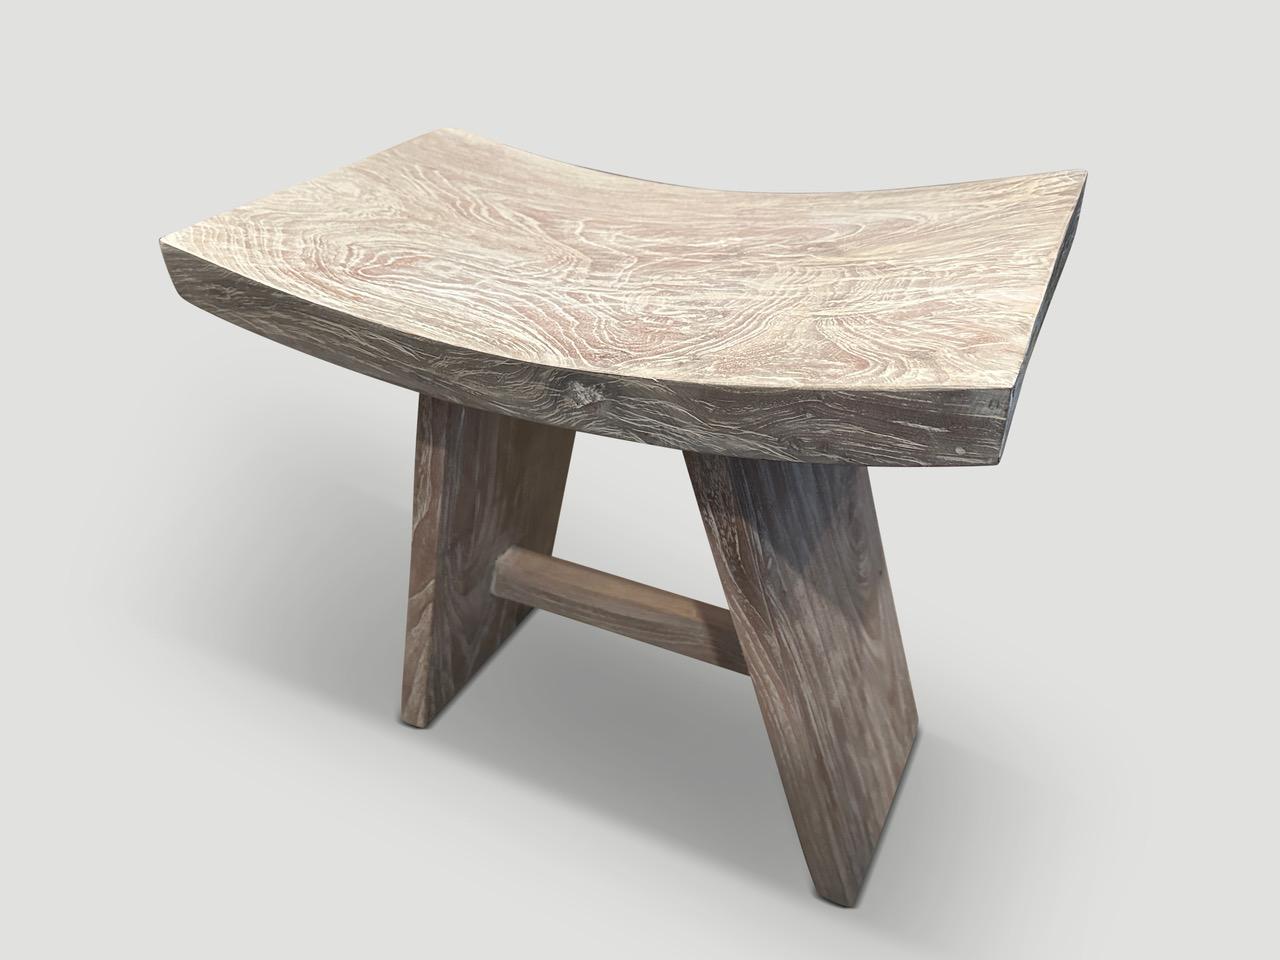 Sleek Minimalist bench or stool handmade from a single slab of reclaimed teak with a cerused finish revealing the beautiful wood grain. We have a collection. The images reflect one. Full dimensions; 19.5 x 11.5 x 17.5? high at center x 18.5? high at